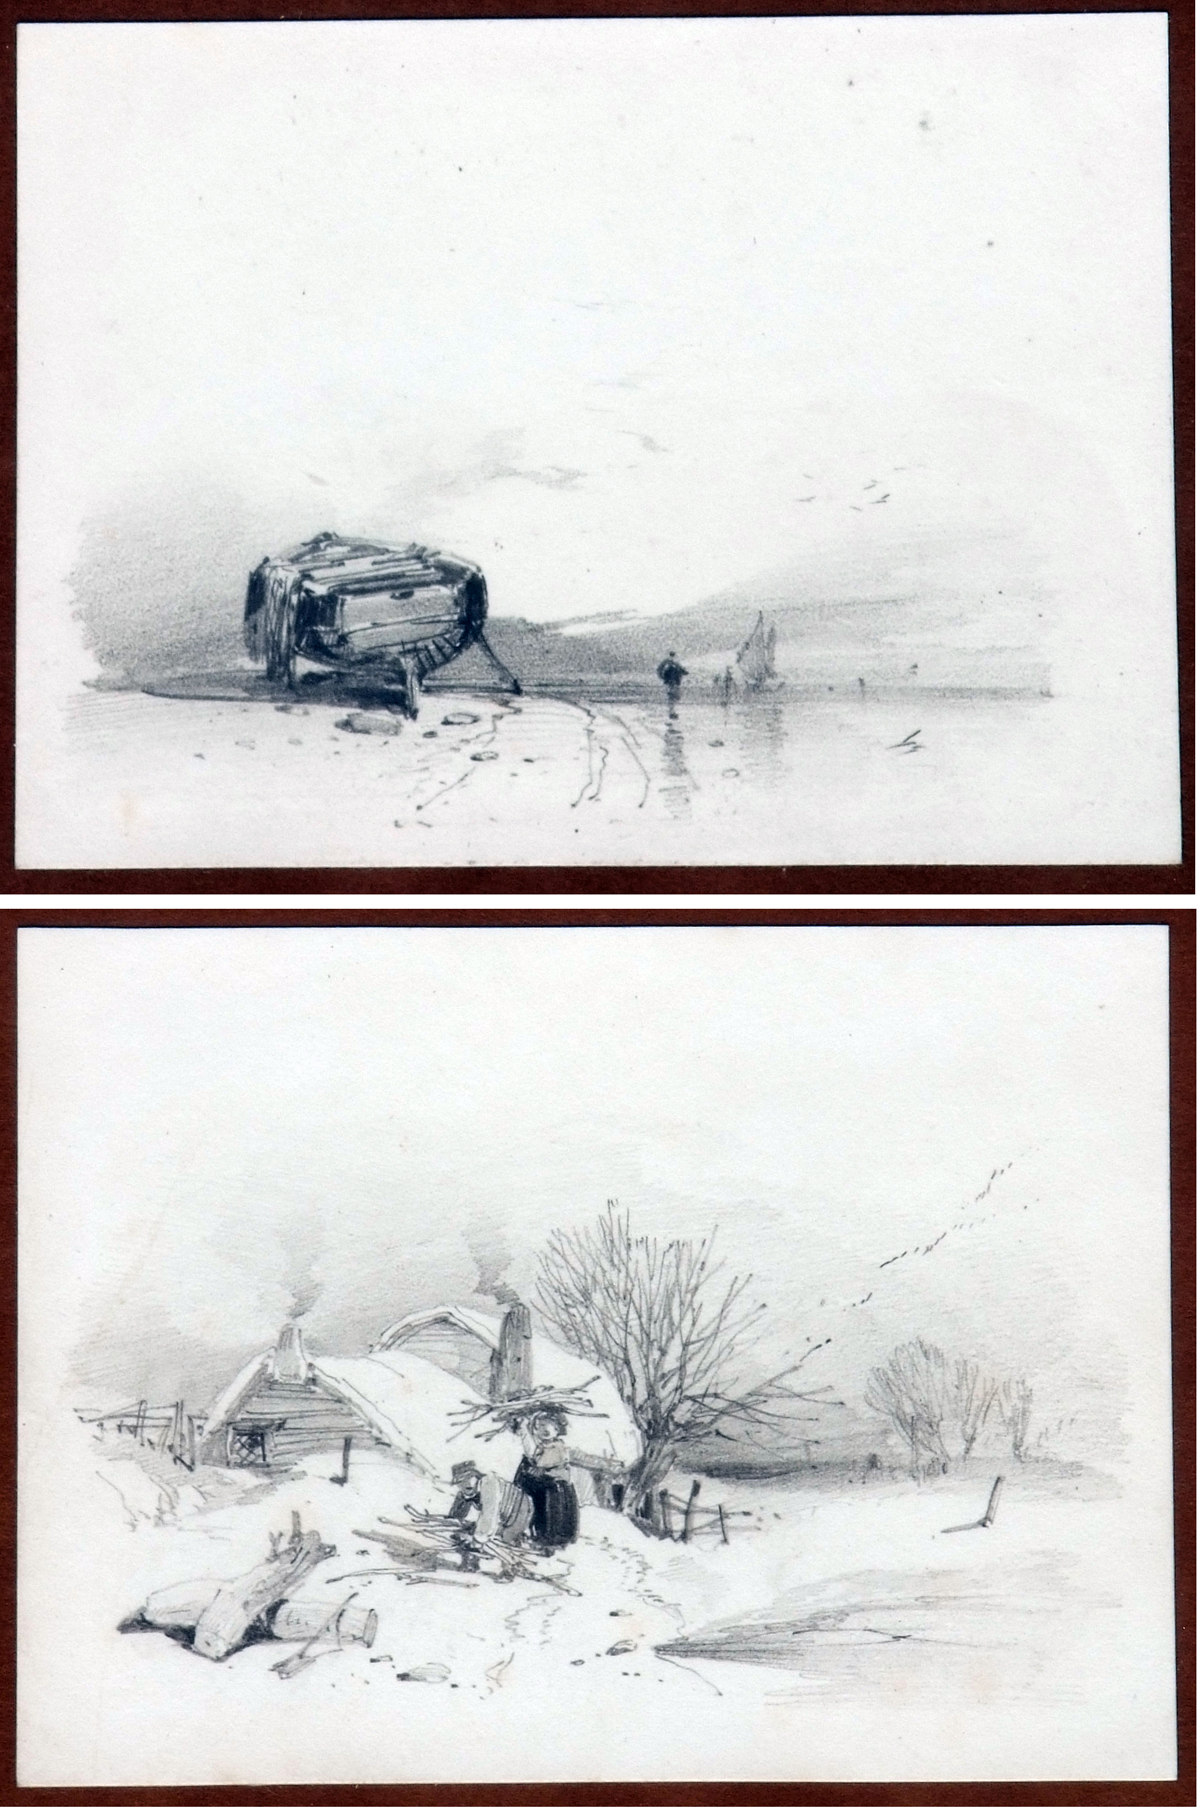 HENRY BRIGHT (1810-1873, BRITISH) 
“Faggot Gathering in the Snow” and “Low Tide”
pair of pencil